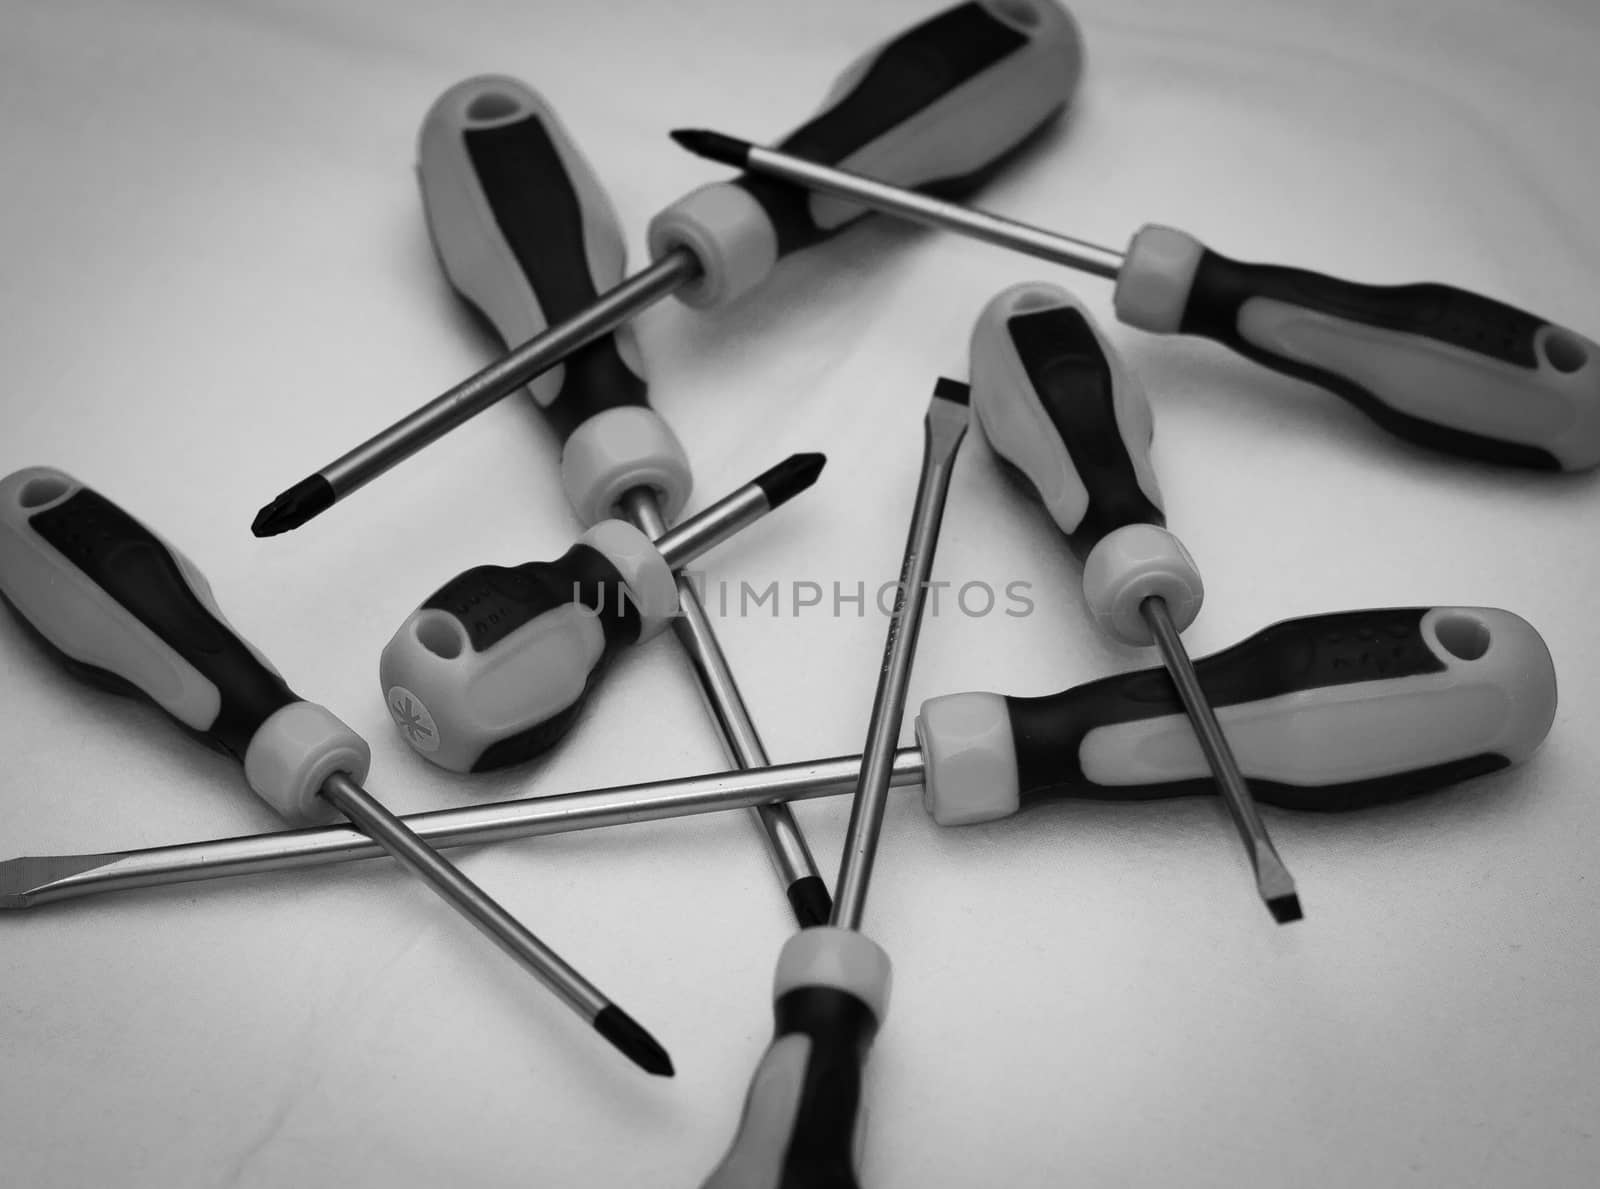 Black and white image with a wide variety of screwdrivers.